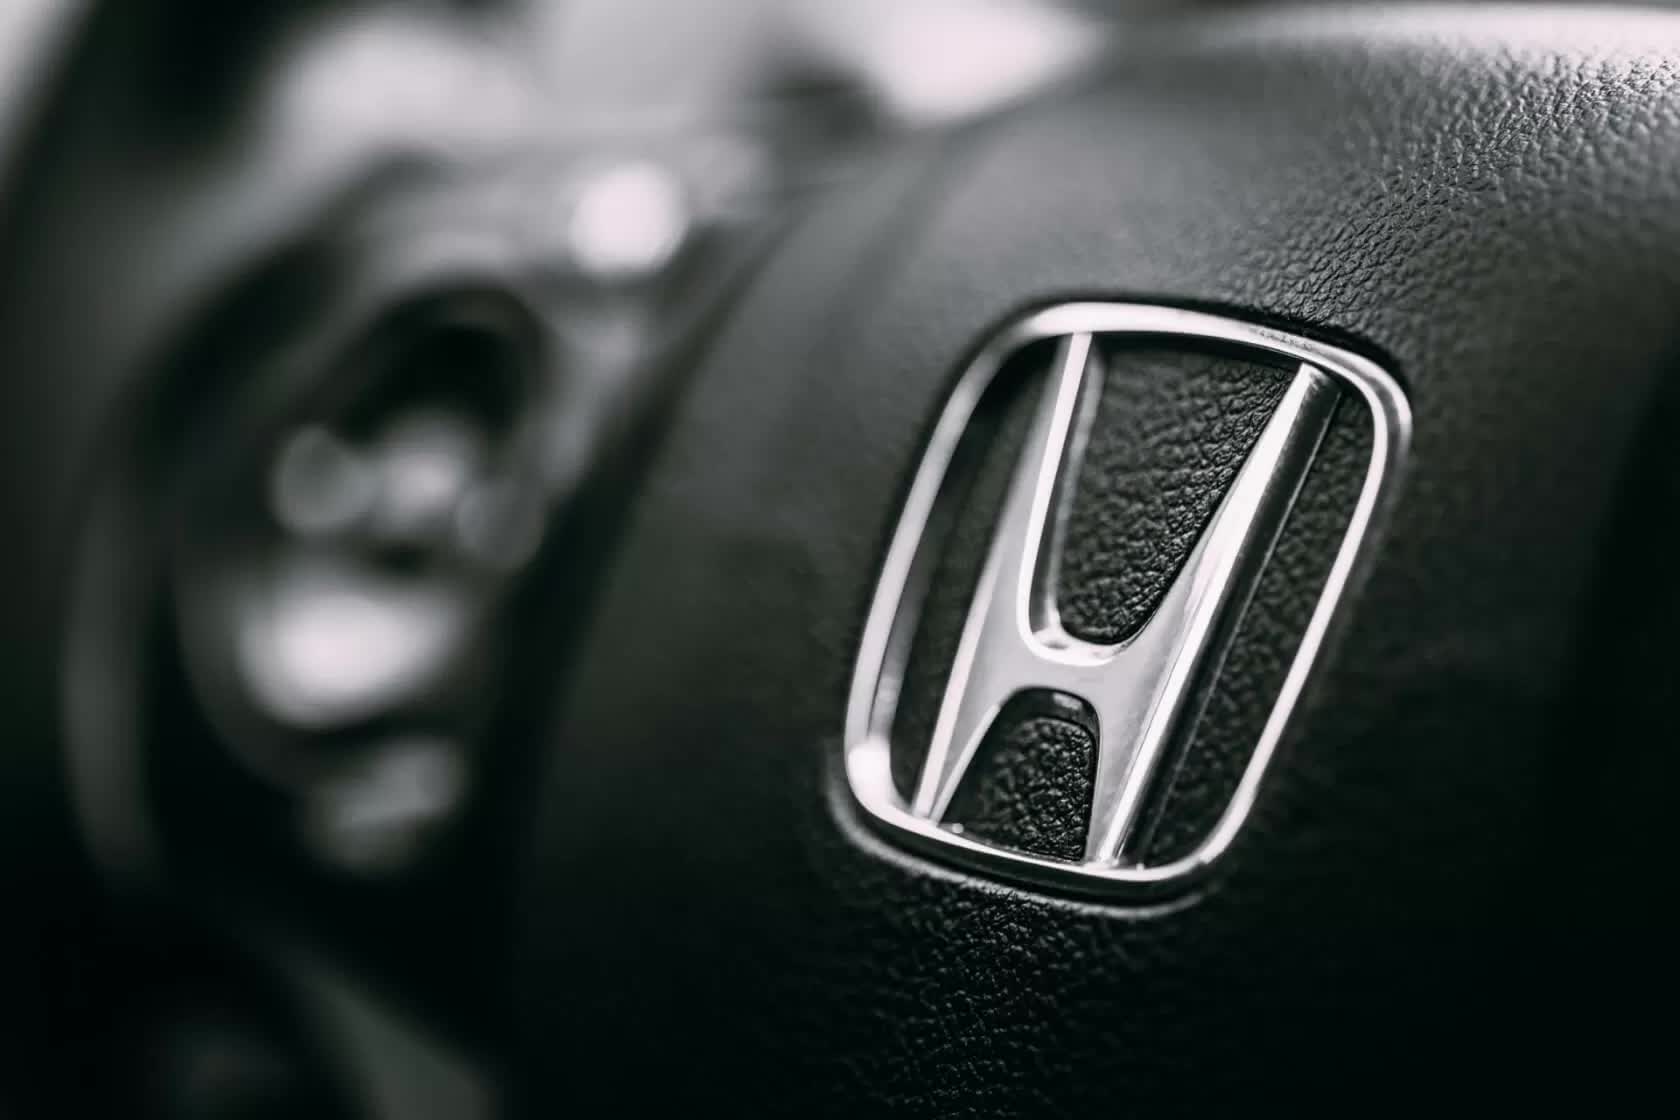 Vulnerability allows hackers to unlock and start Honda cars remotely